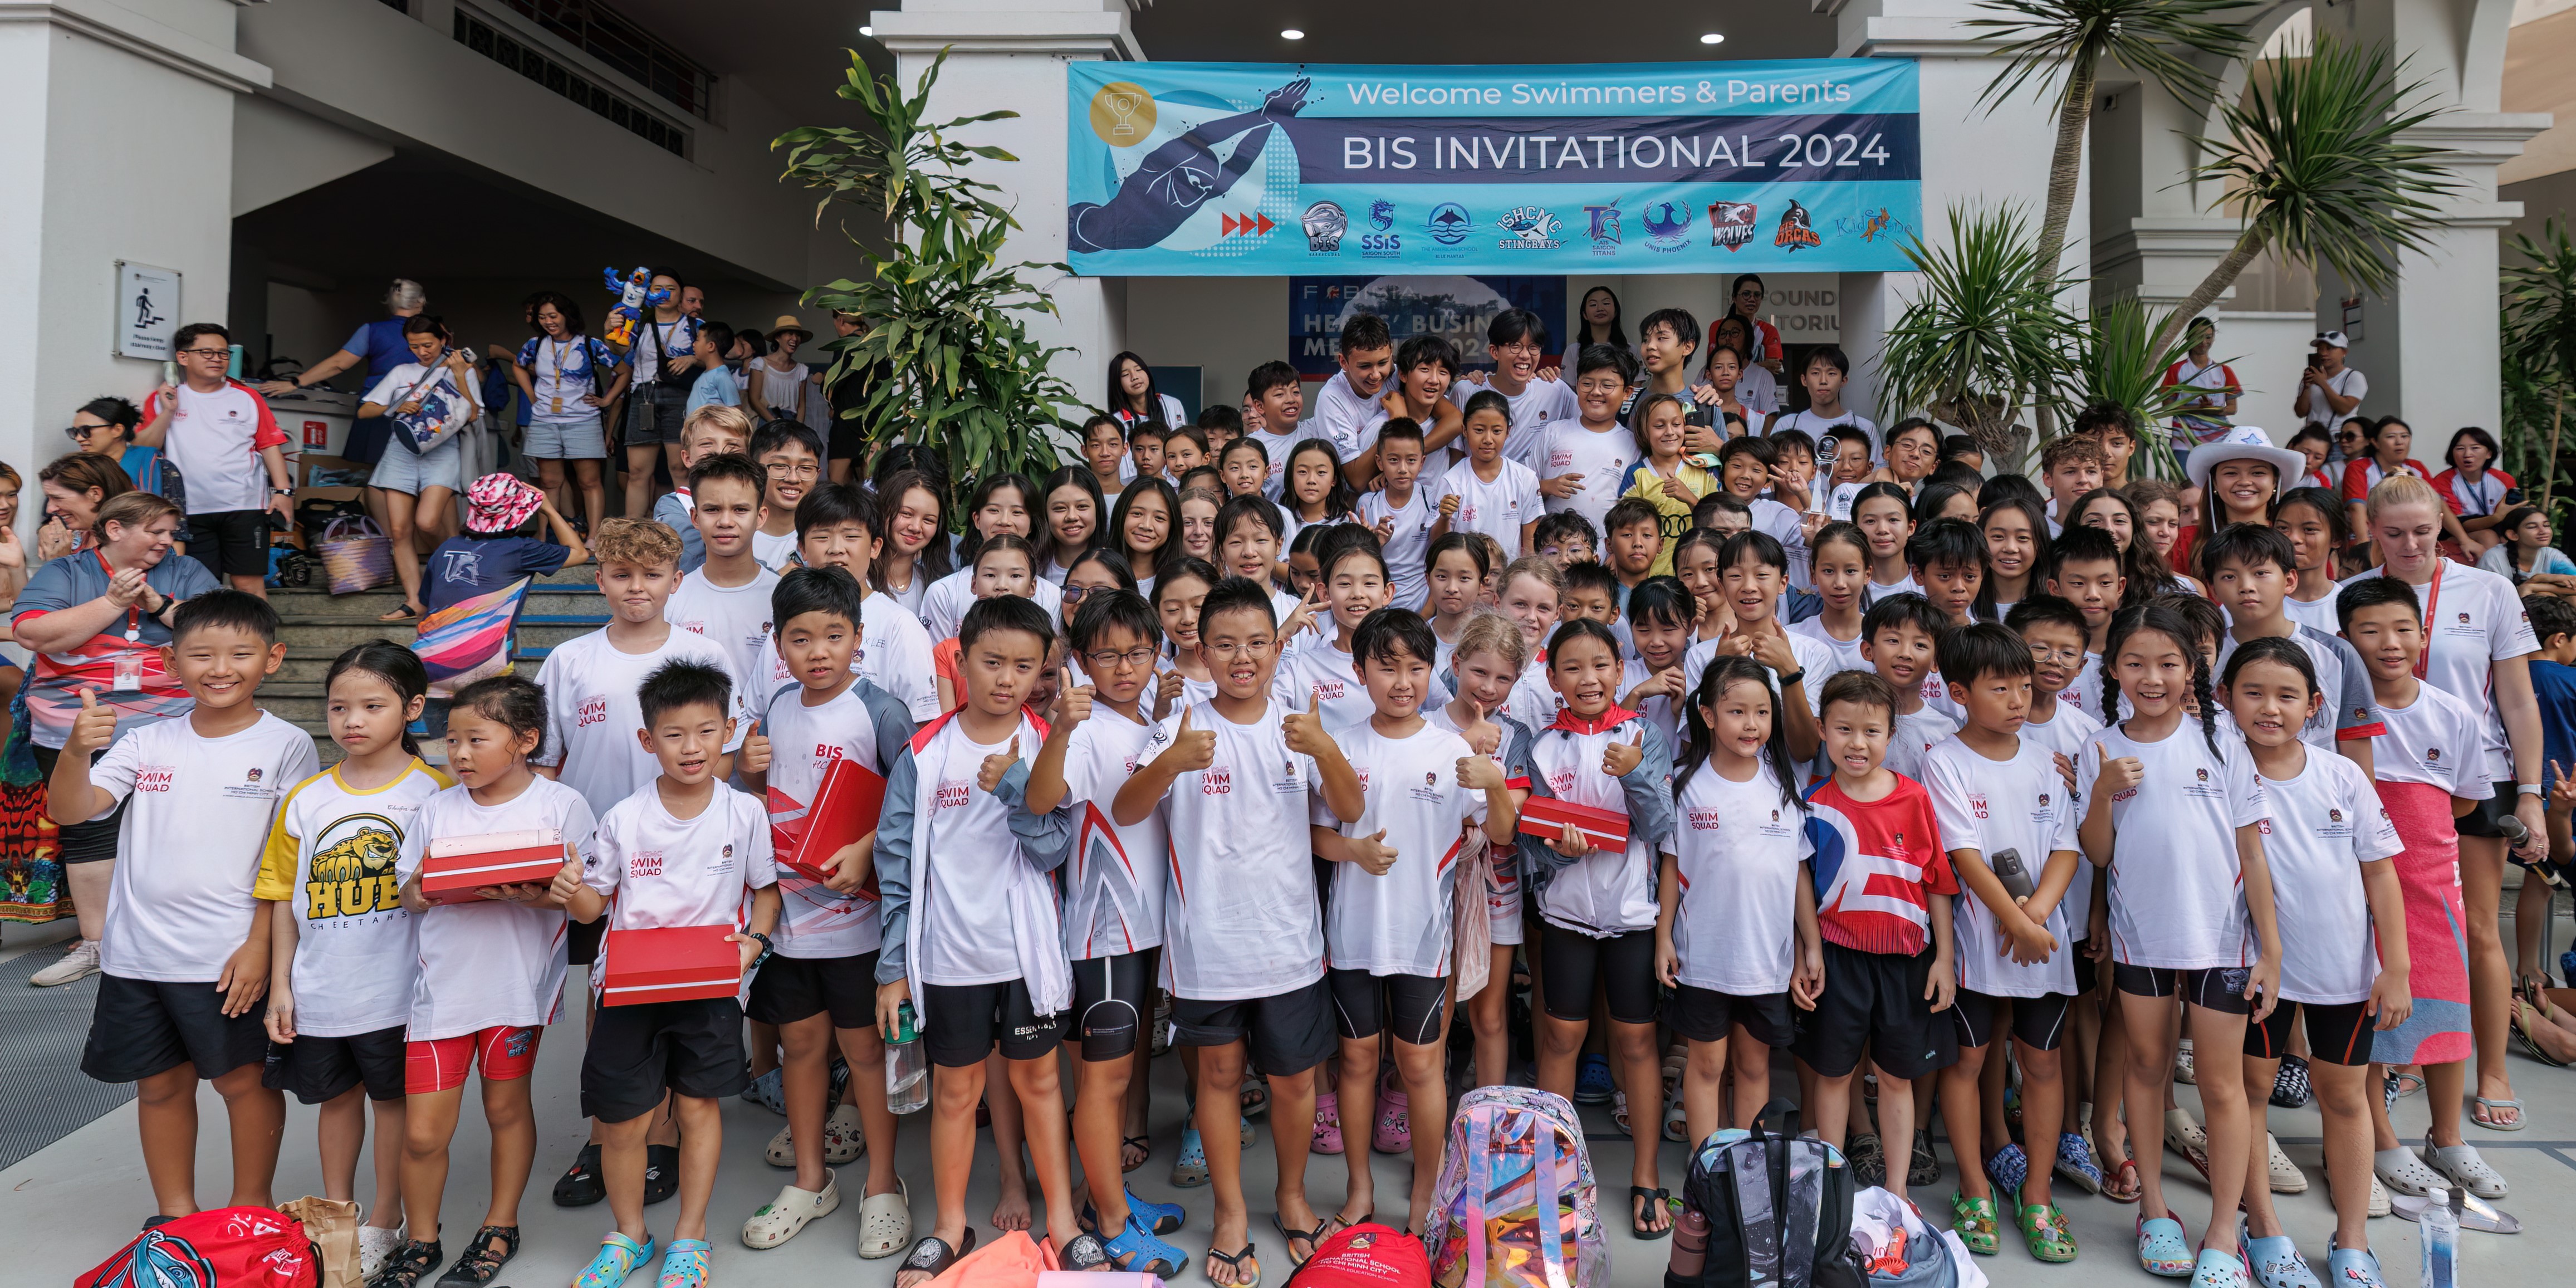 BIS Barracudas finish the season as champions with passion perseverance and outstanding swimming - BIS Barracudas finish the season as champions with passion perseverance and outstanding swimming